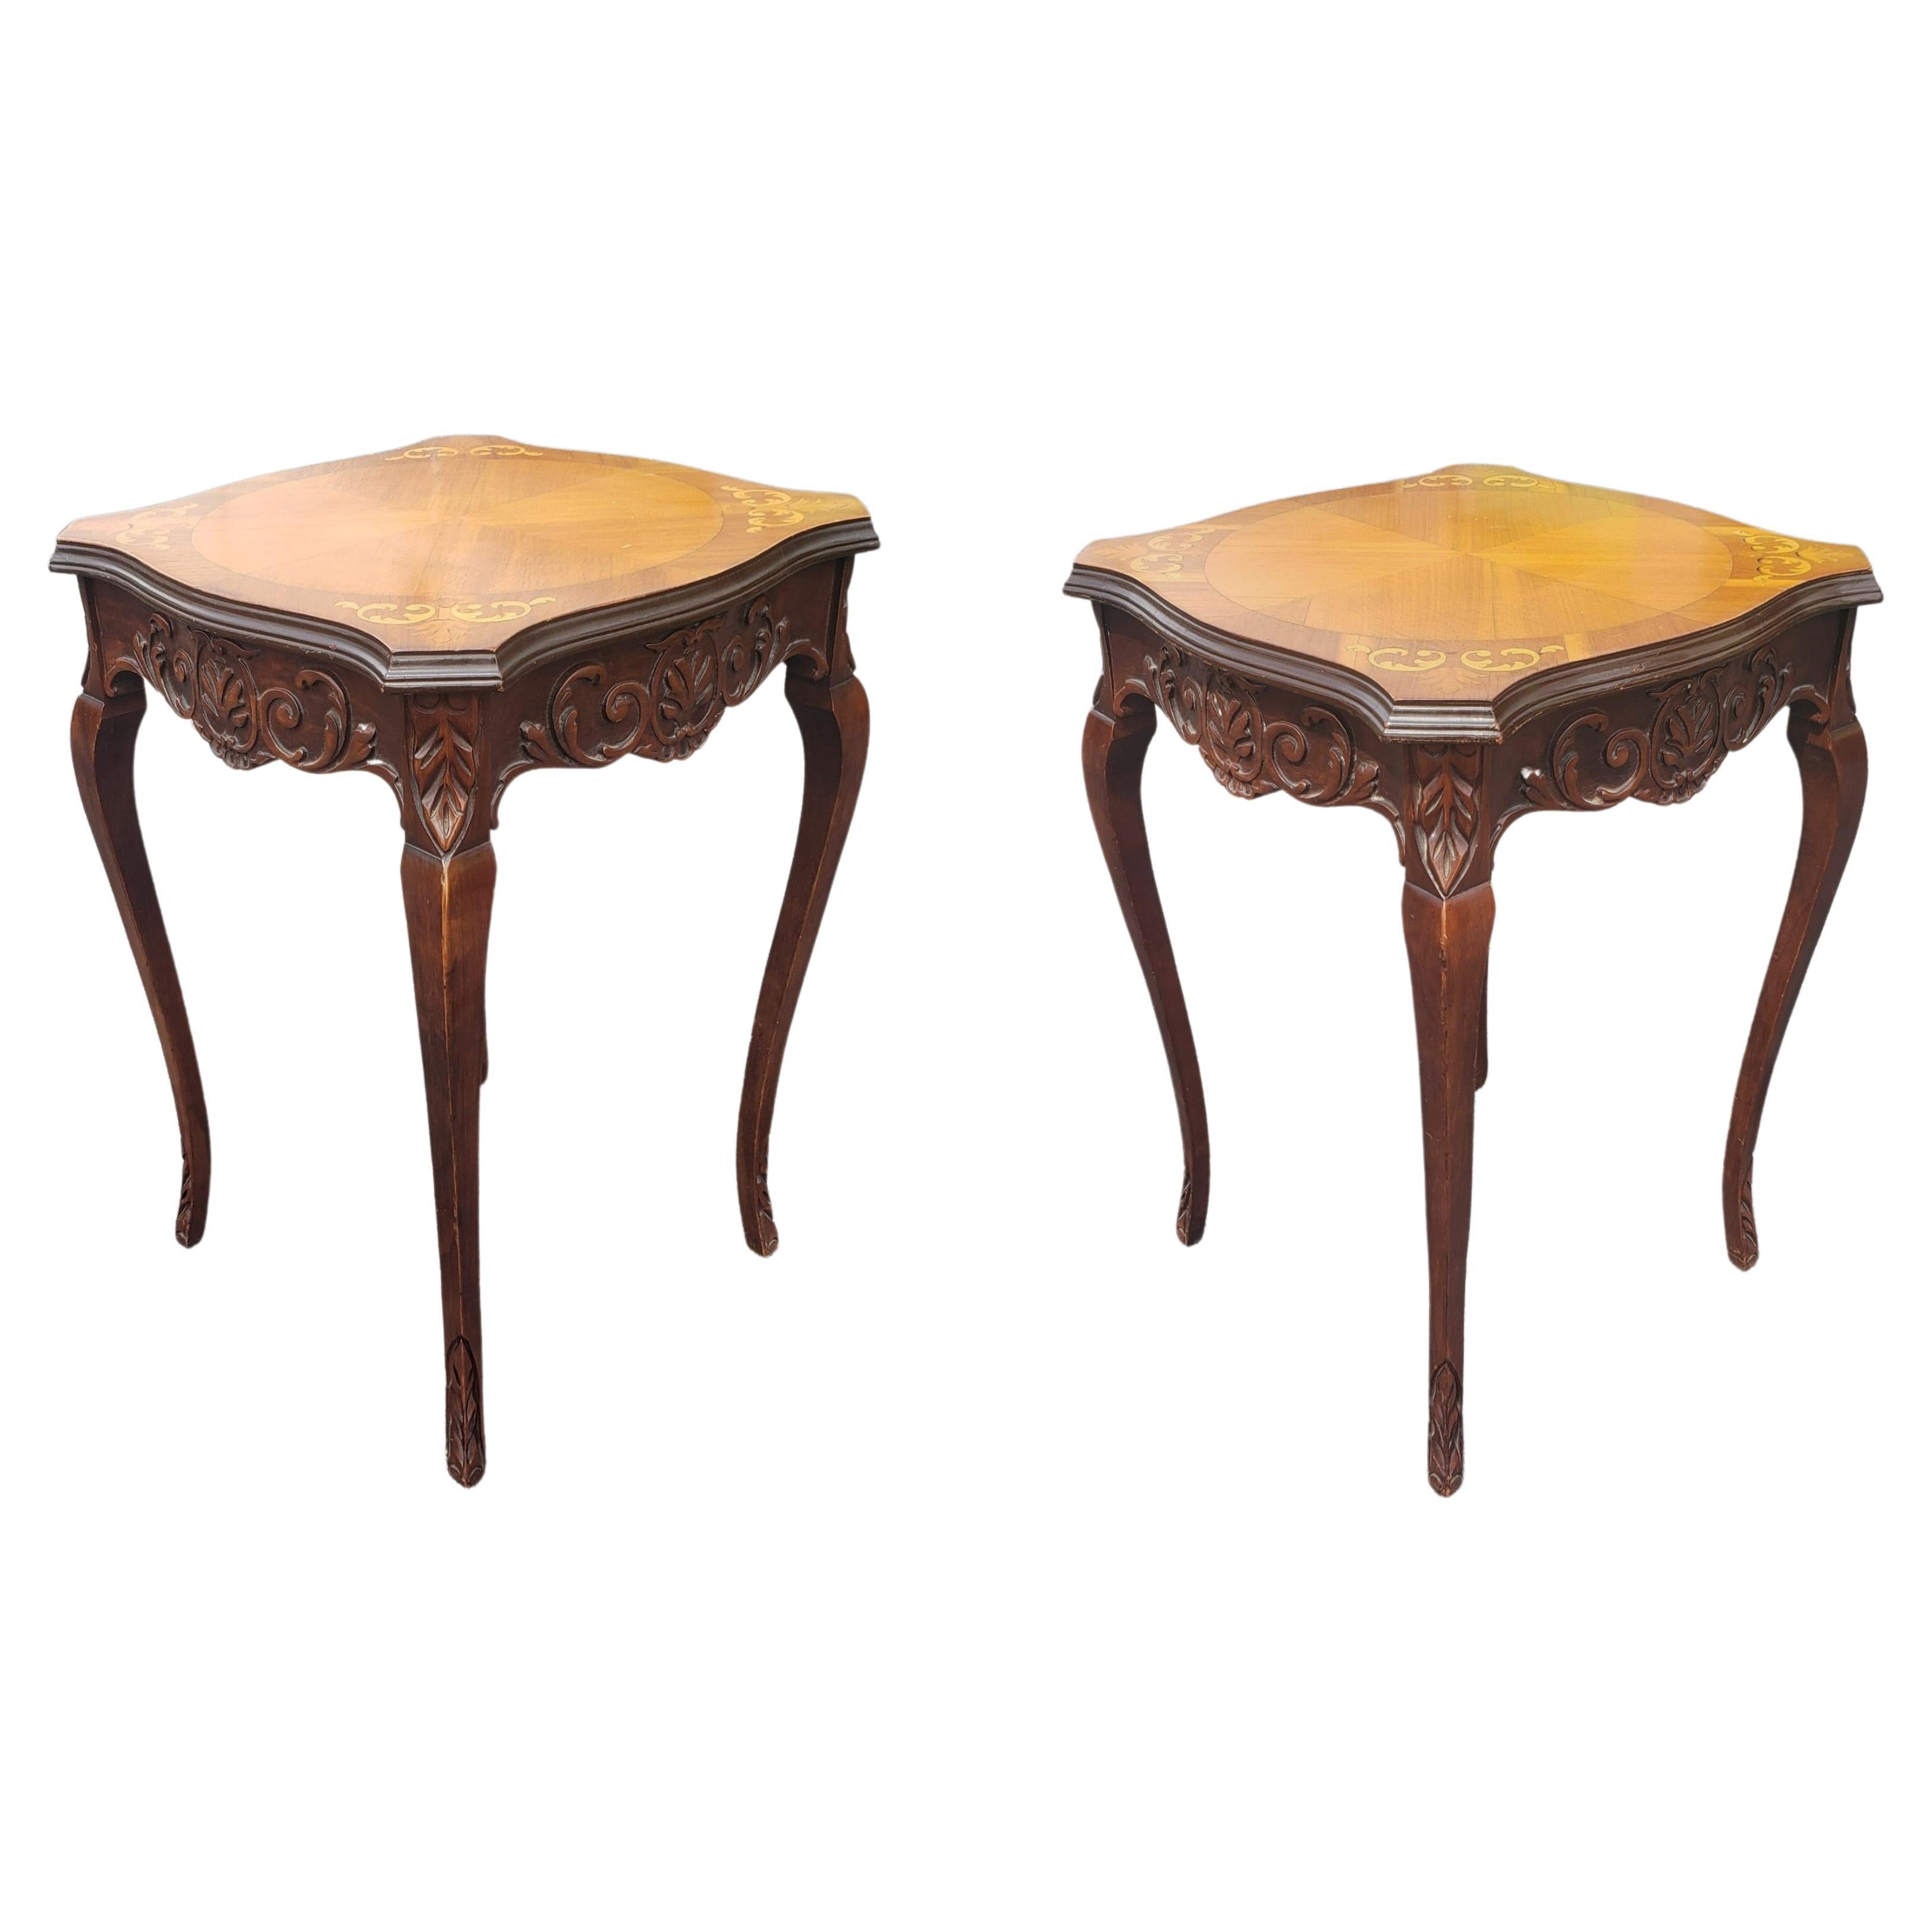 Pair of Mid-Century French Empire Style Carved Walnut and Marquetry Side Tables